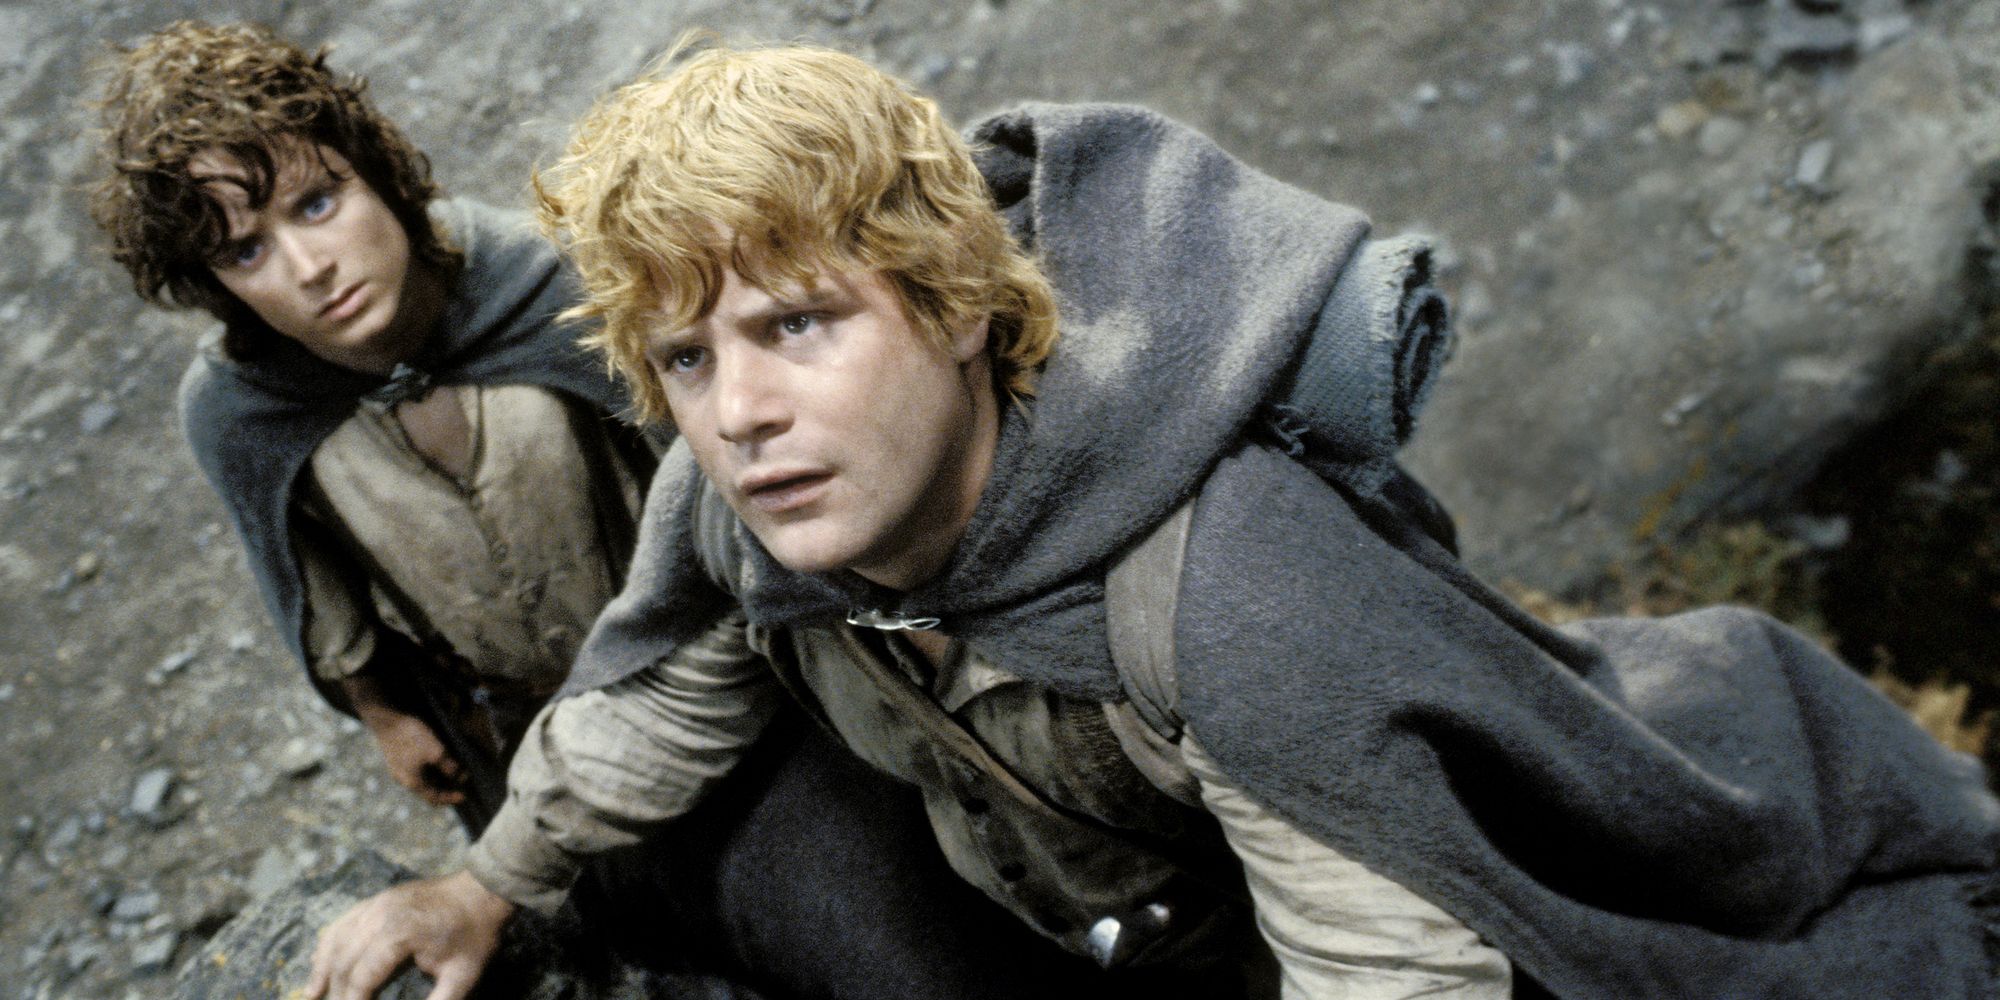 DIY Samwise Gamgee Costume - Channel Your Inner Hobbit!